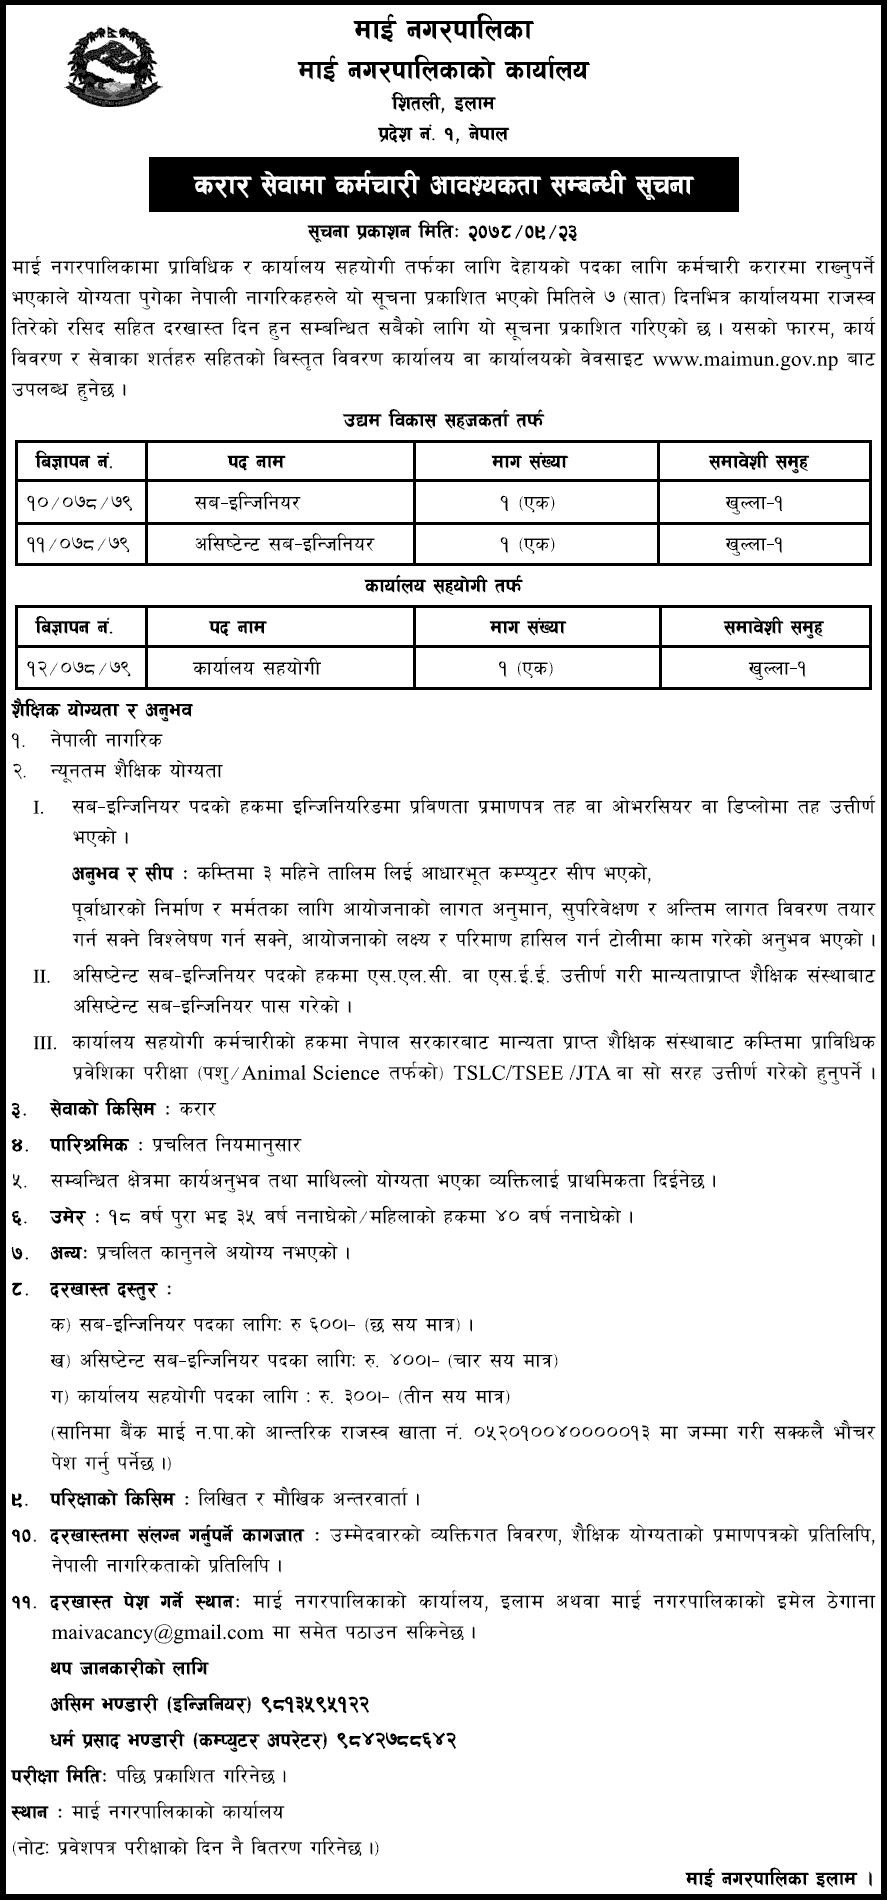 Mai Municipality Vacancy for Sub Engineer, Assistant Sub Engineer and VJTA